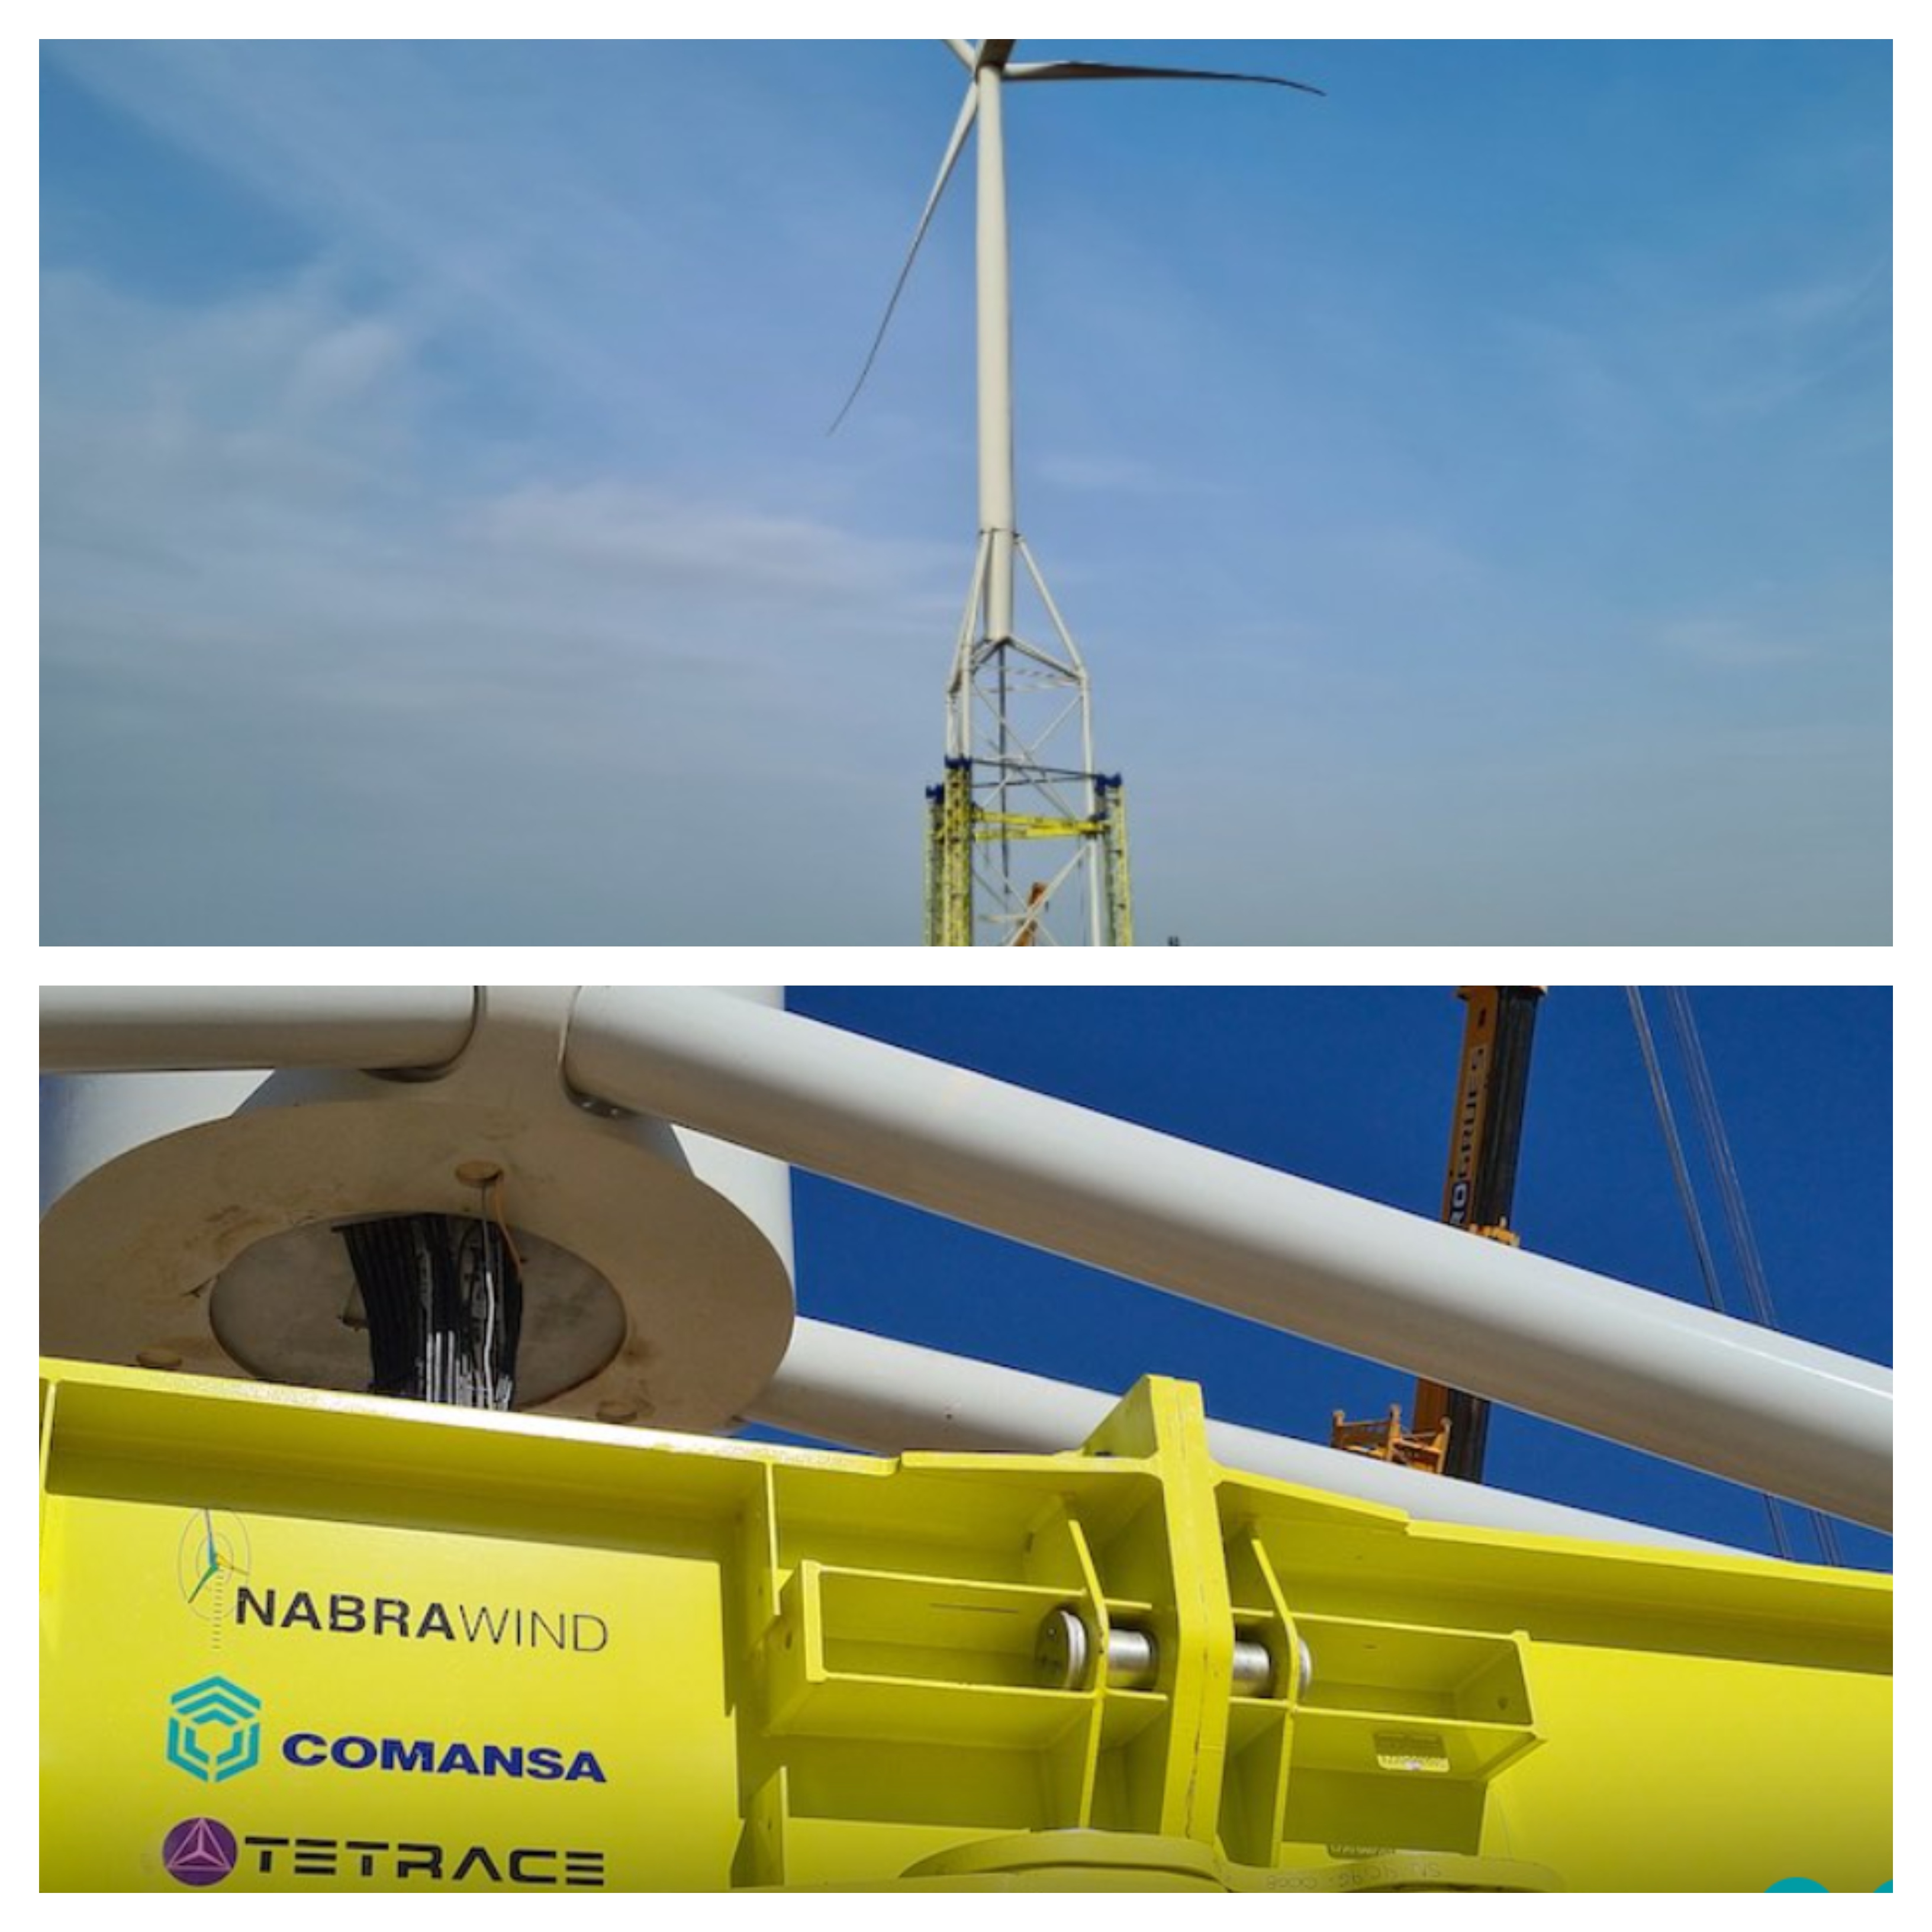 COMANSA brings their industrial expertise in lifting technology to the wind energy sector